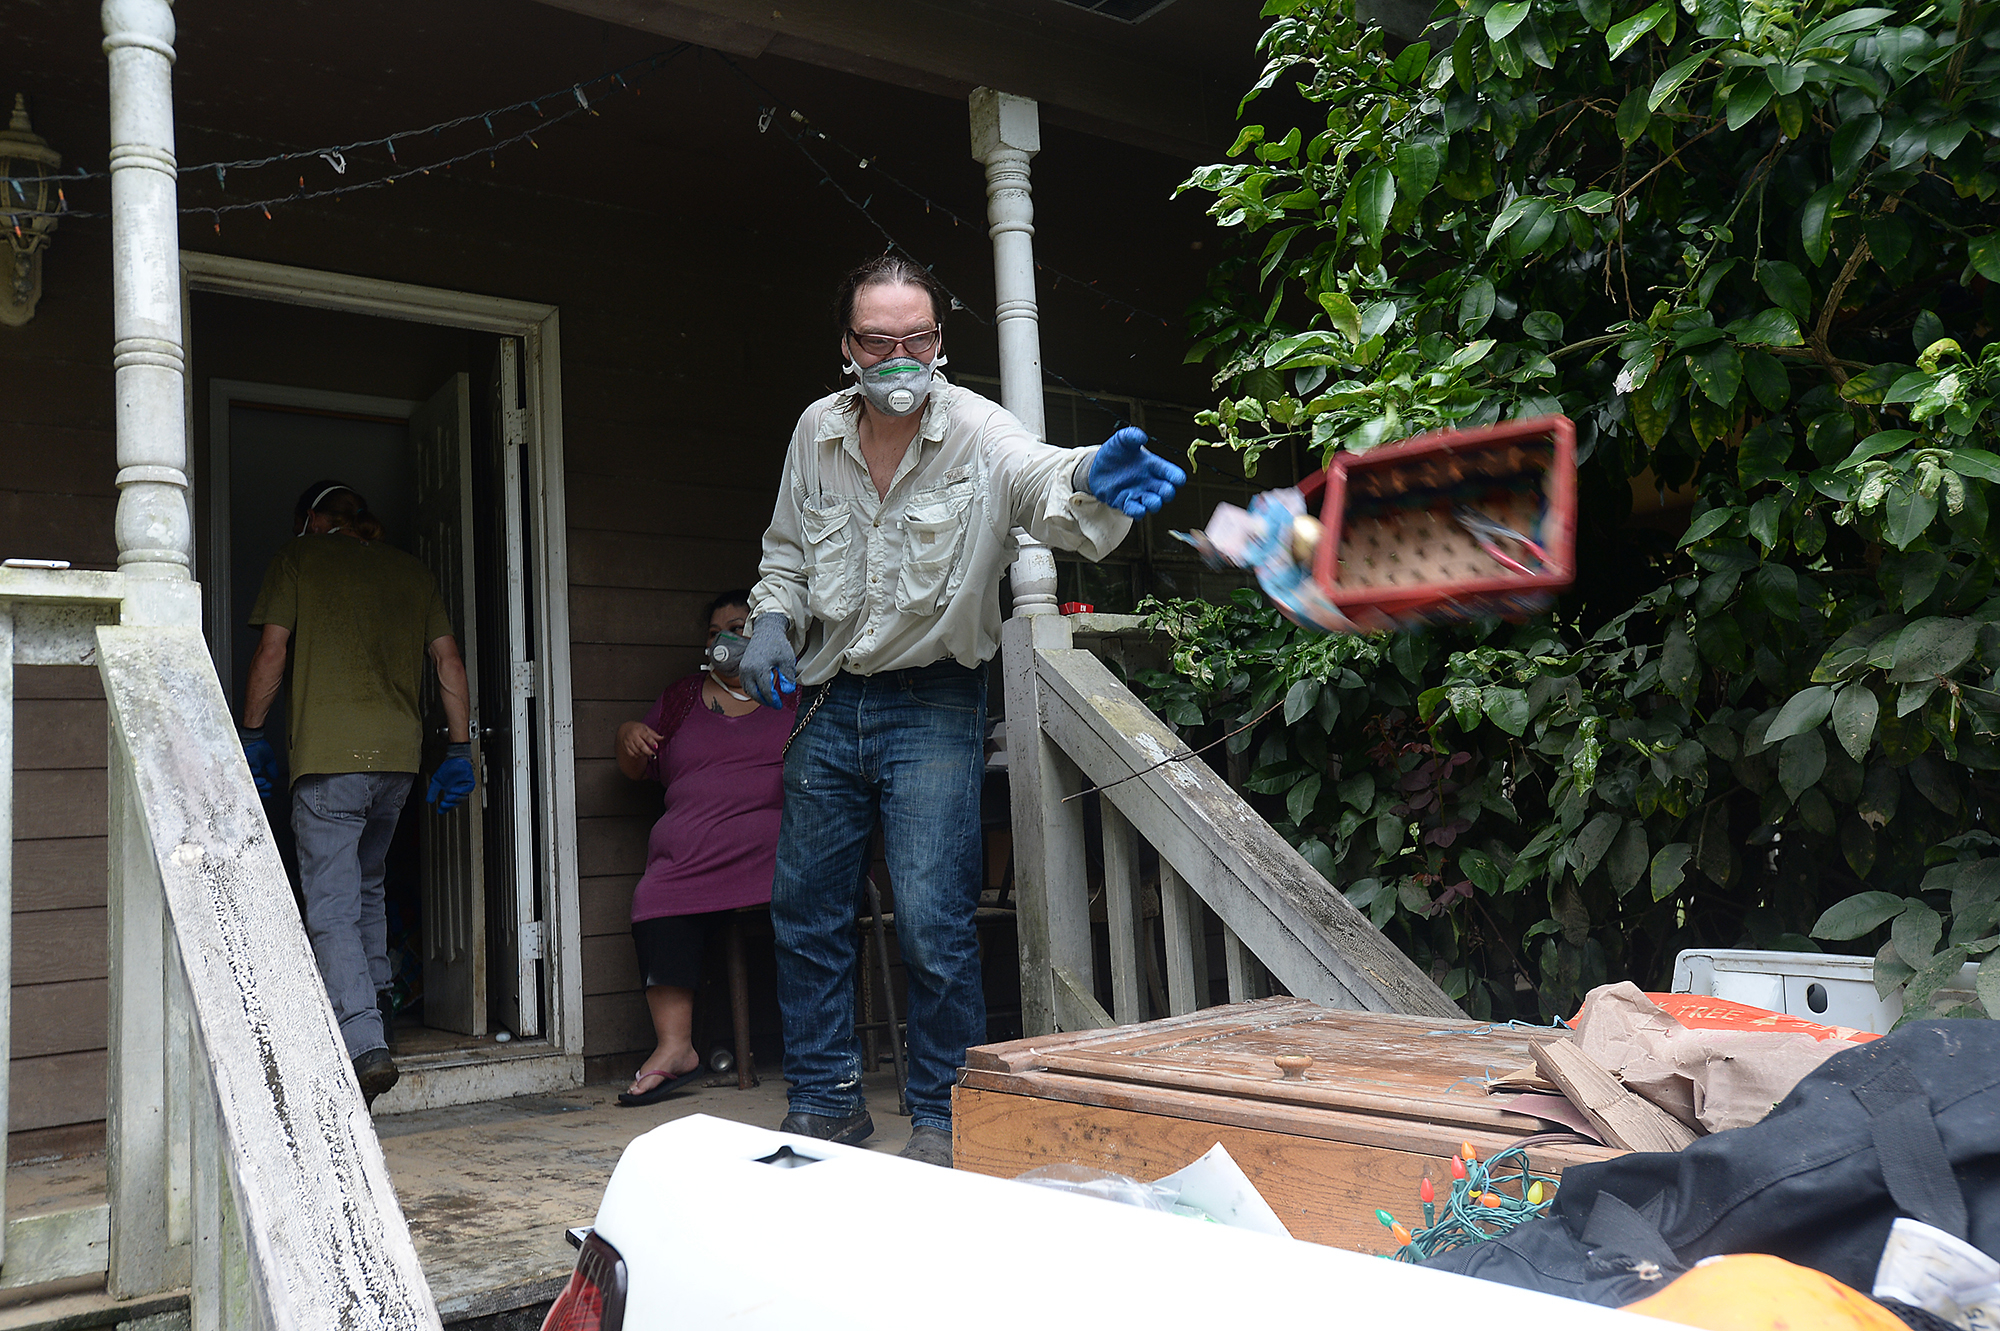  Steven Kaufman tosses another flood damaged item onto a growing pile in the bed of his pickup truck as Corey Mendes heads back in to pull out more debris from the Kaufman's residence on Mitchell Road in north Beaumont Wednesday. Mendes and wife Chri